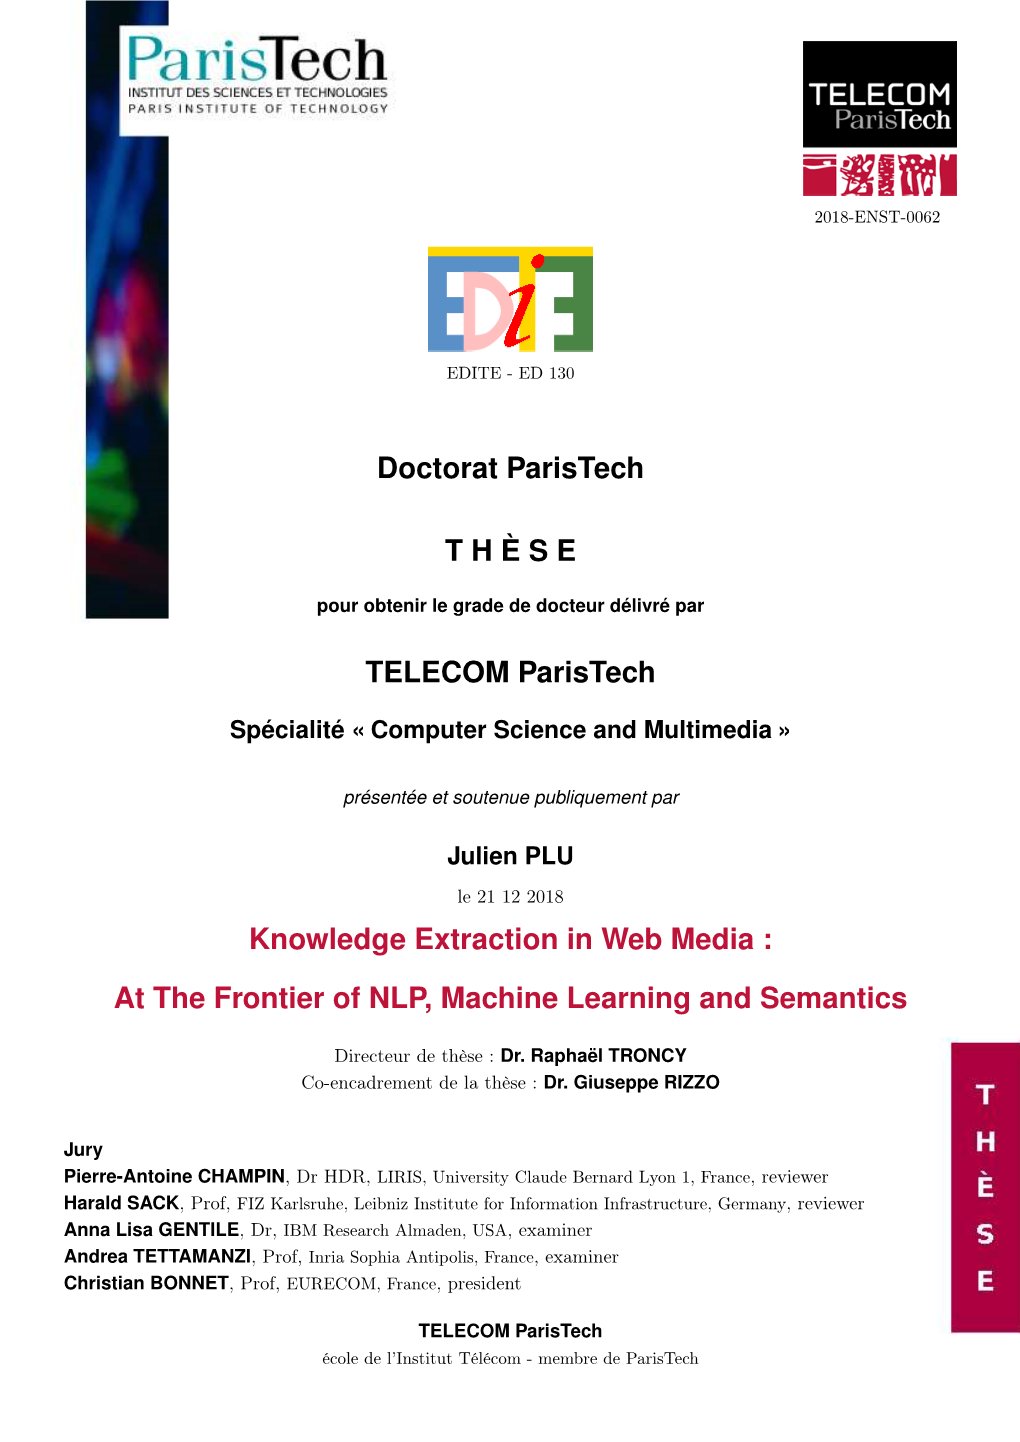 At the Frontier of NLP, Machine Learning and Semantics